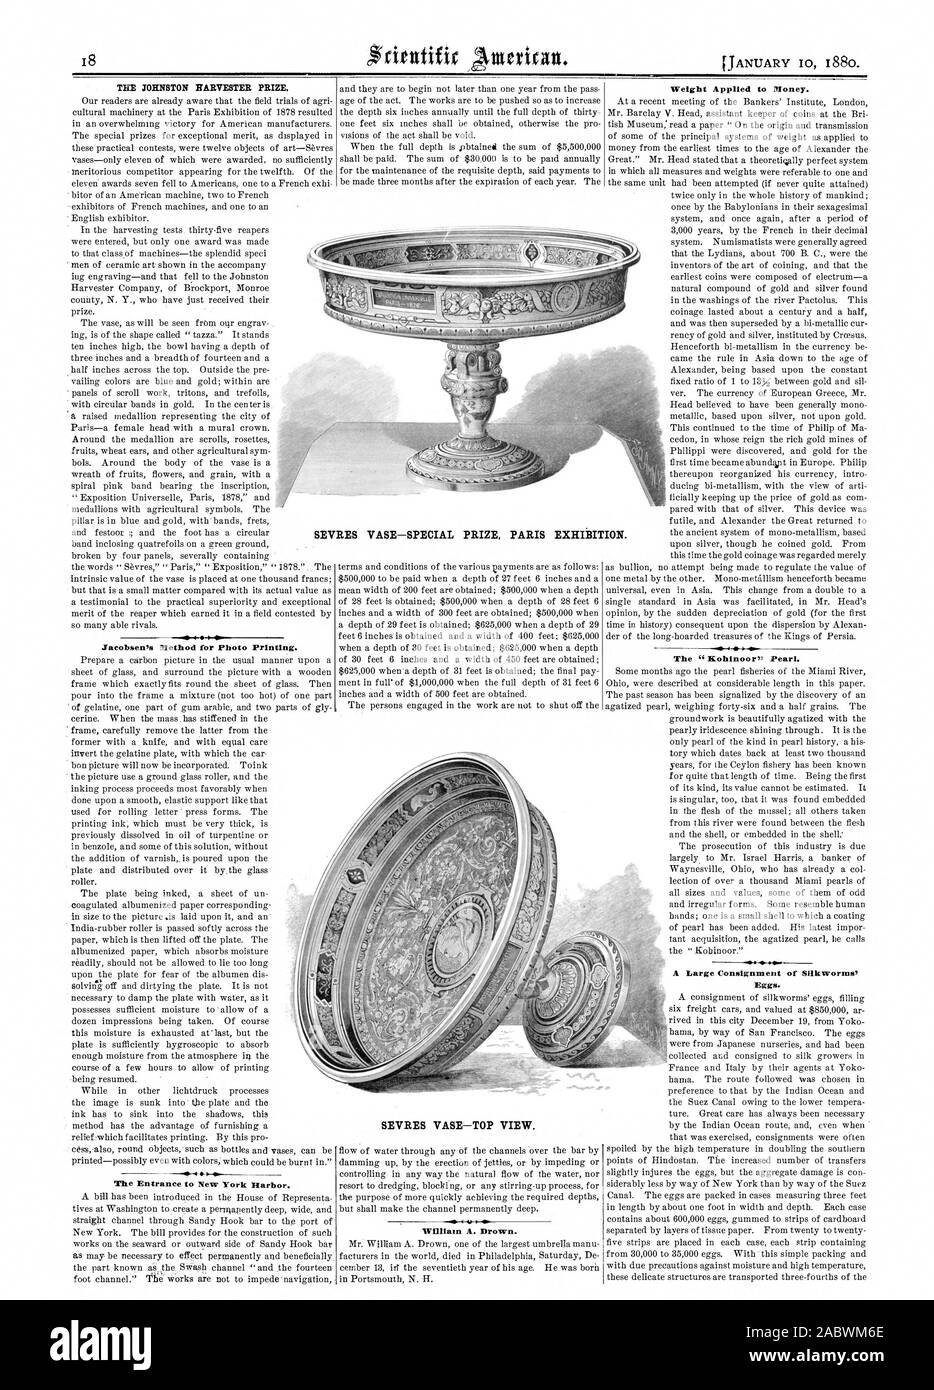 THE JOHNSTON HARVESTER PRIZE. Jacobsen's Method for Photo Printing. The Entrance to New York Harbor. SEVRES VASE—TOP VIEW. William A. Drown. Weight Applied to Money. A Large Consignment of Silkworms' Eggs. SEVRES VASE—SPECIAL PRIZE PARIS EXHIBITION., scientific american, 1880-01-10 Stock Photo